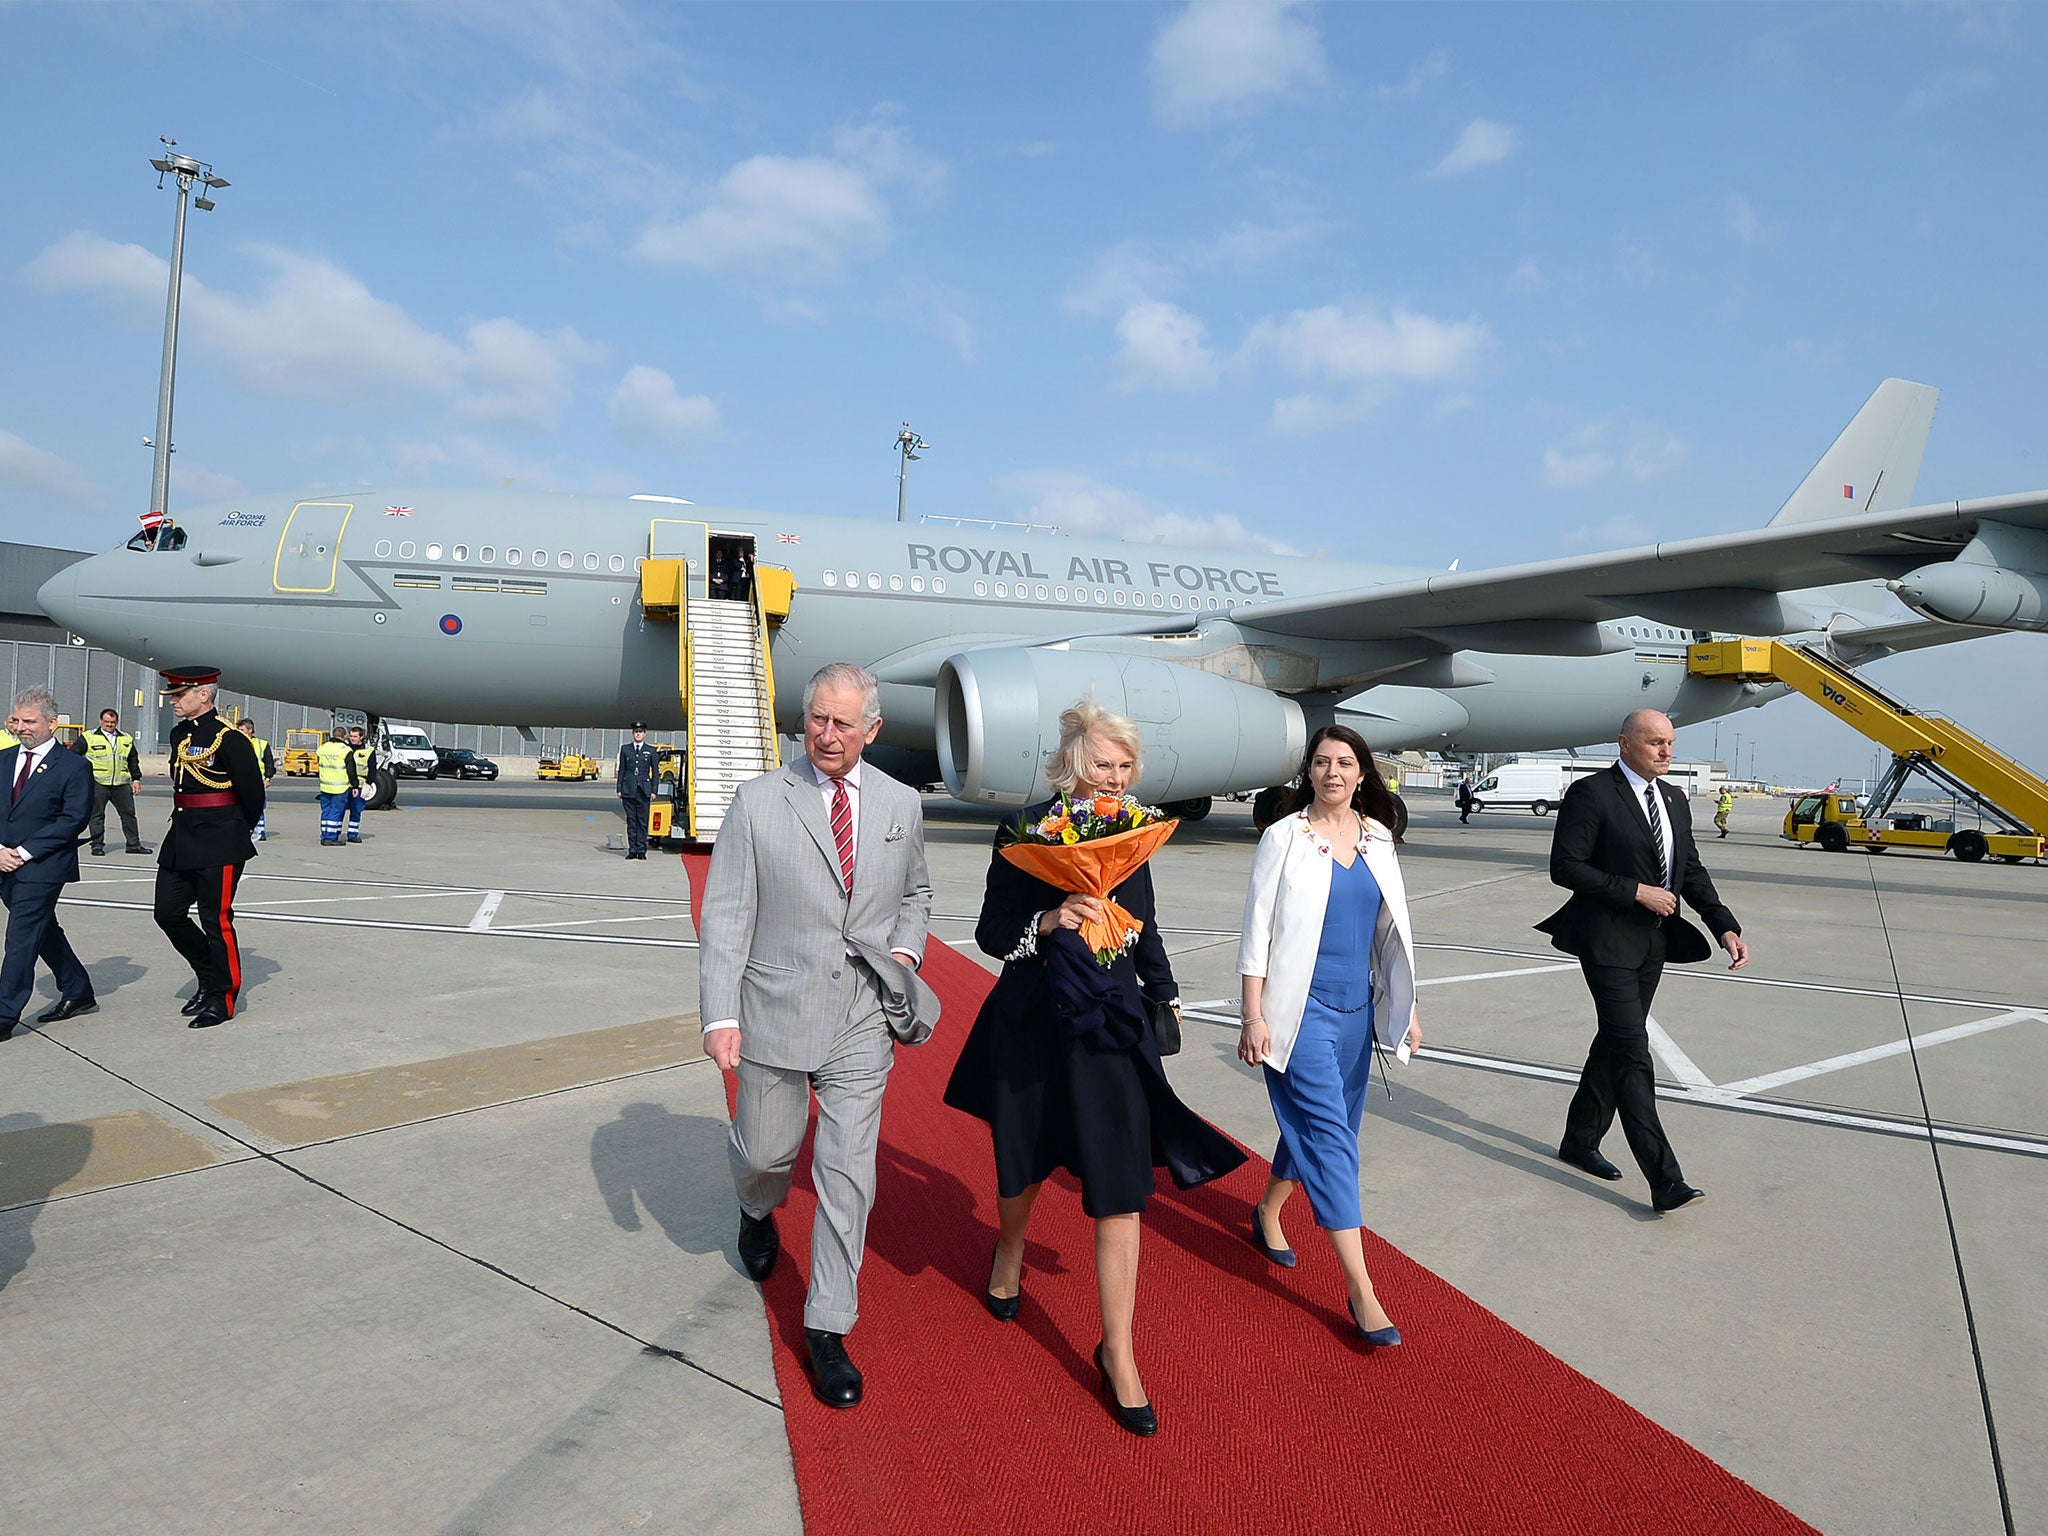 The ministerial jet was converted from an RAF plane to help save money on official trips